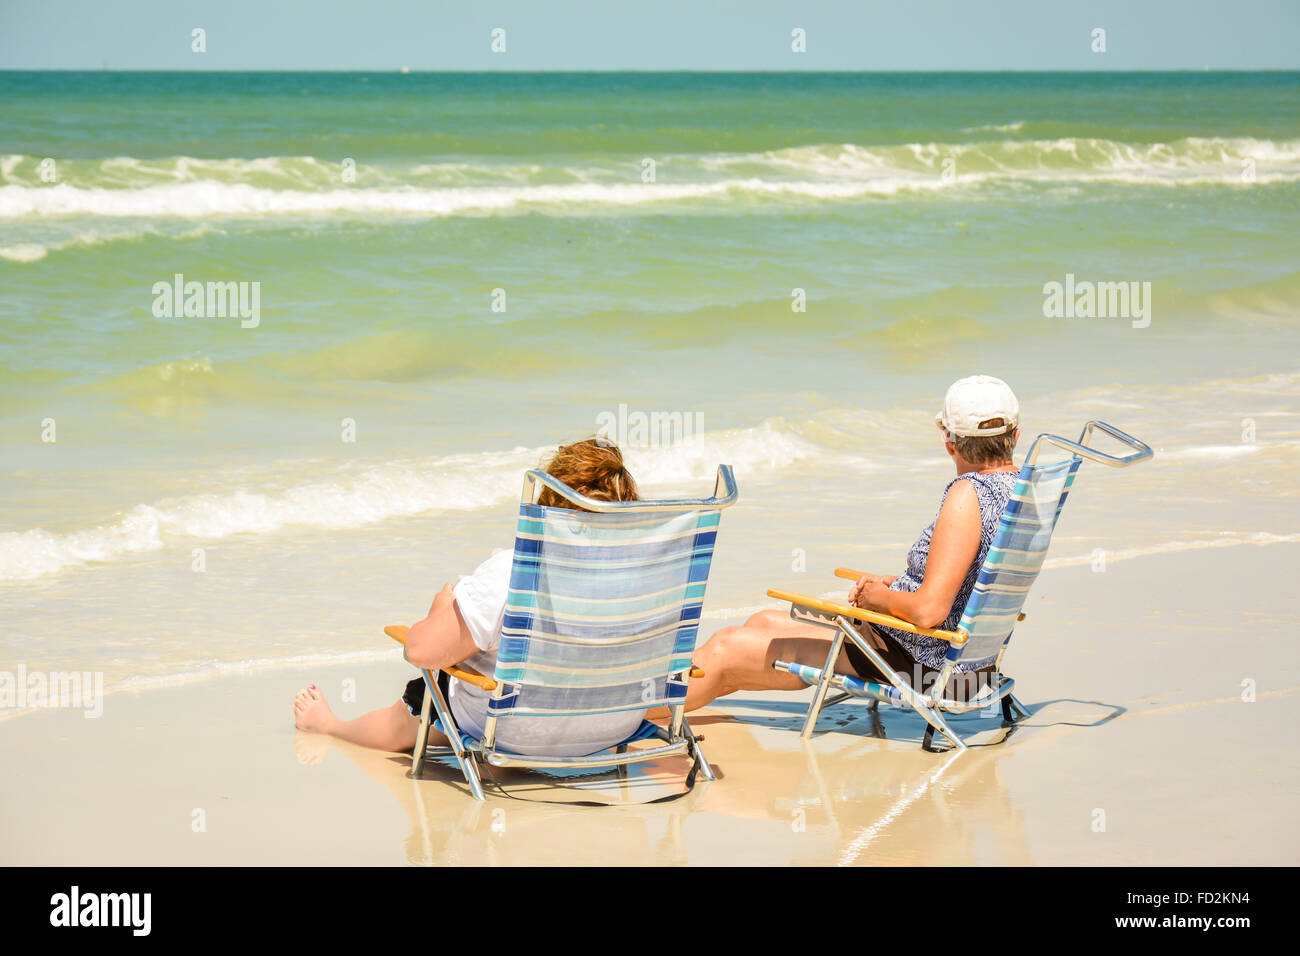 Two women enjoy sitting in their beach chairs with their legs in the surf at the shoreline and watching the waves roll in Stock Photo